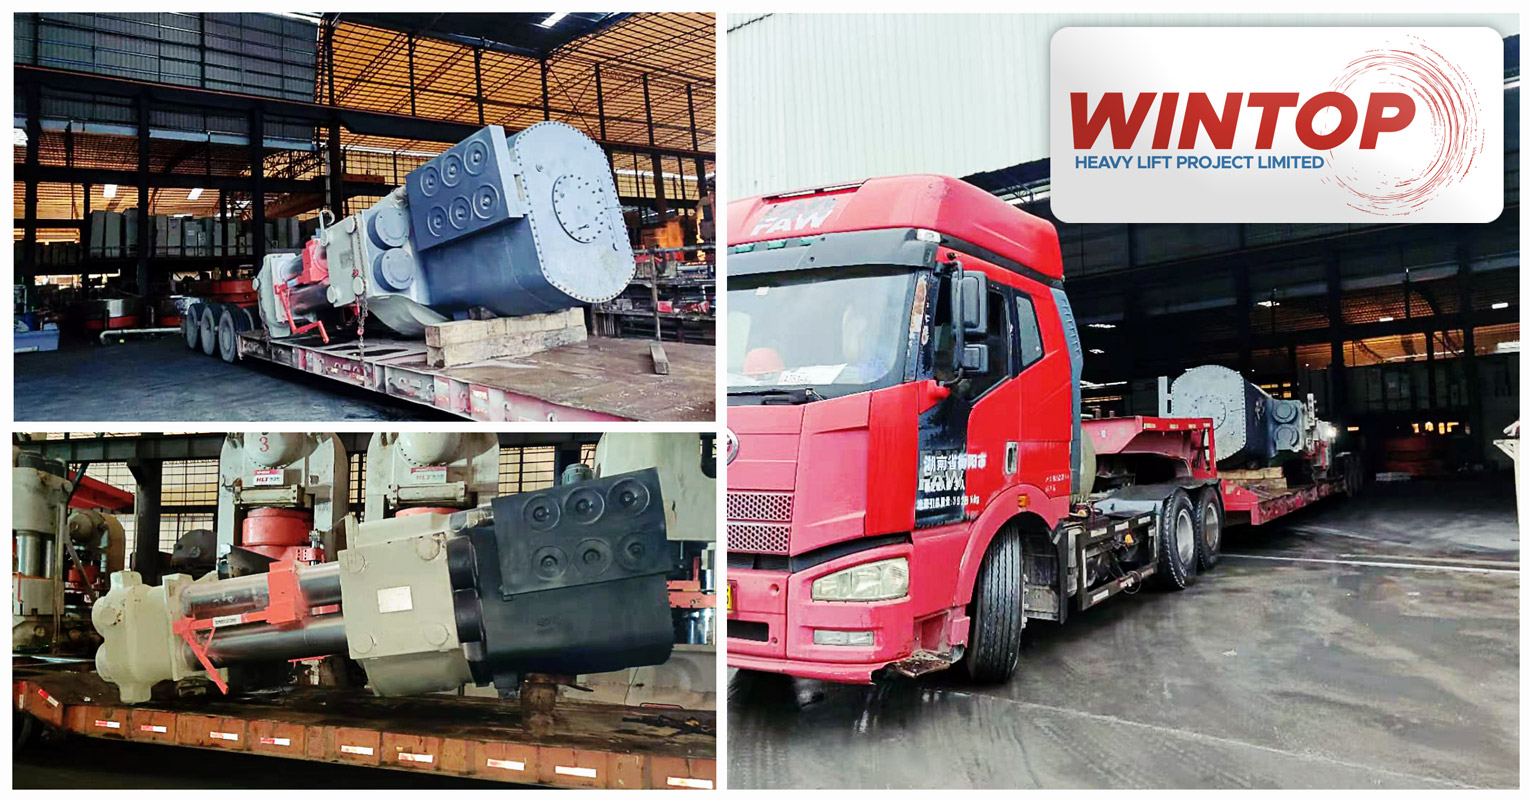 Wintop Heavylift Shipped 2 x 95mt Breakbulk Peices from Shanghai to India